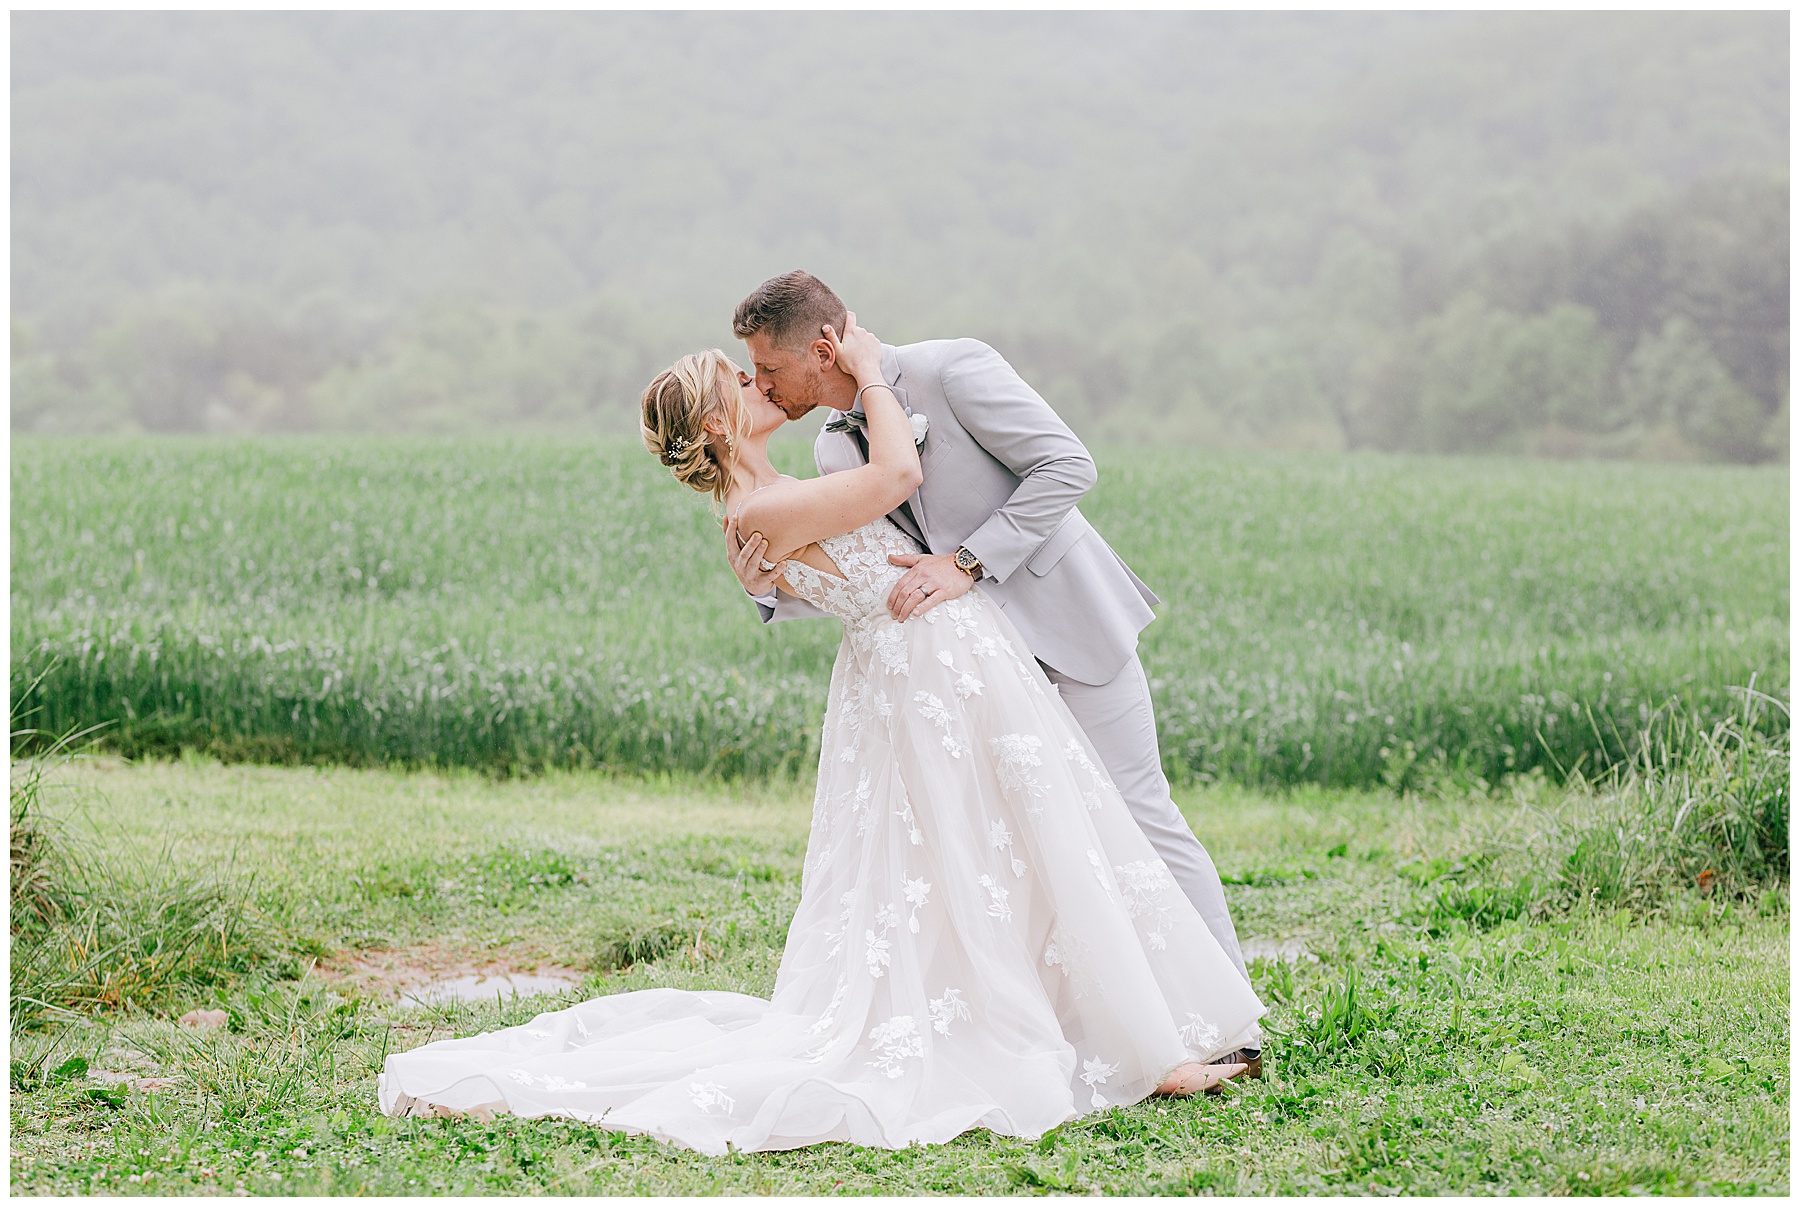 Wedding at the the barns of Madison county